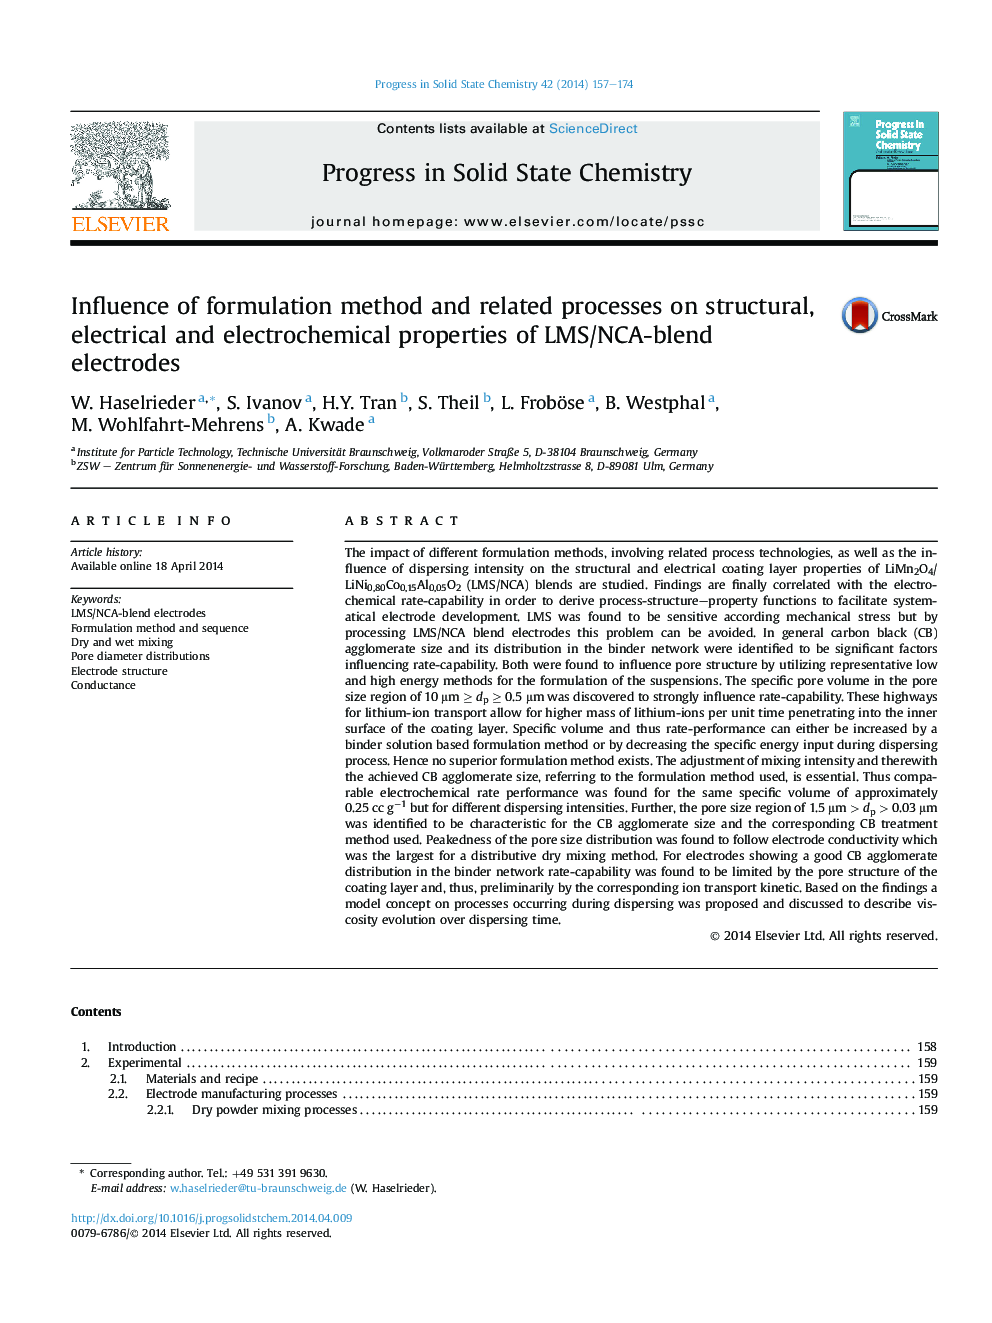 Influence of formulation method and related processes on structural, electrical and electrochemical properties of LMS/NCA-blend electrodes